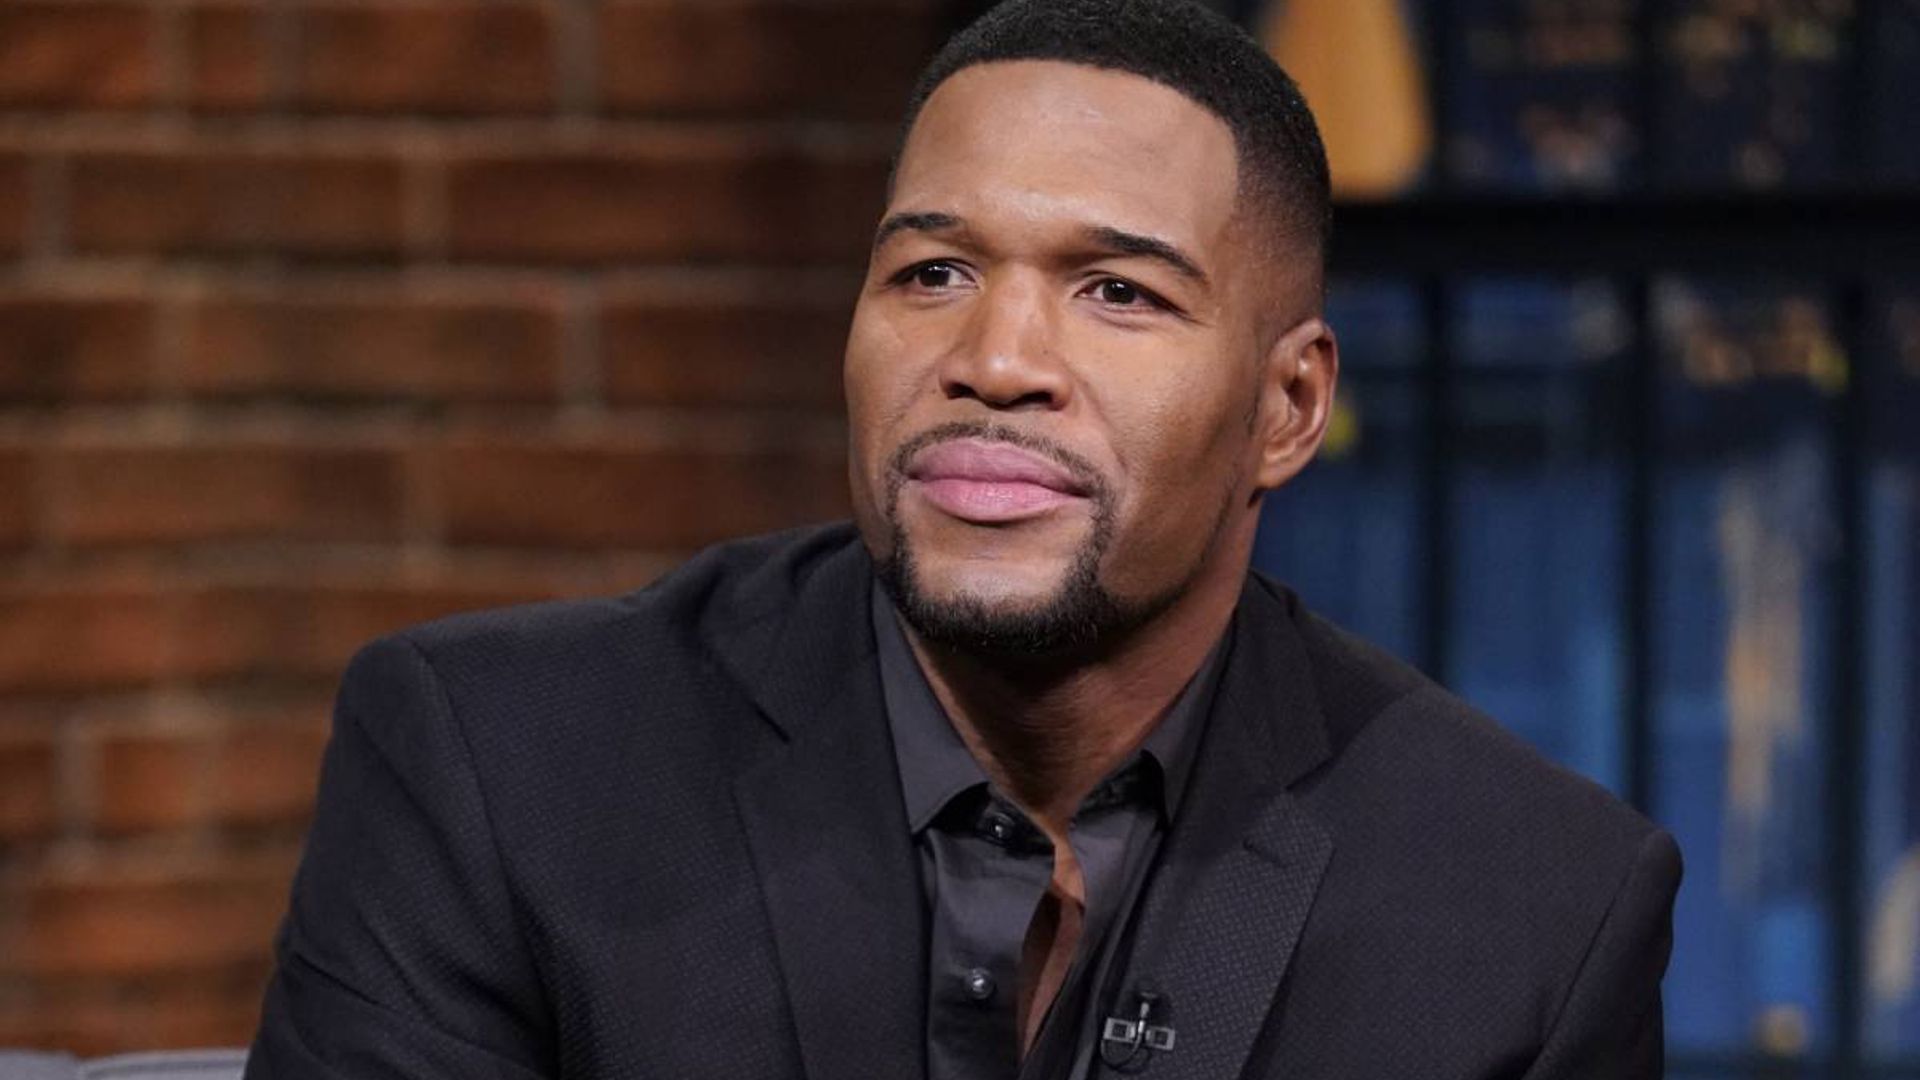 gma michael strahan appearance sparks reaction